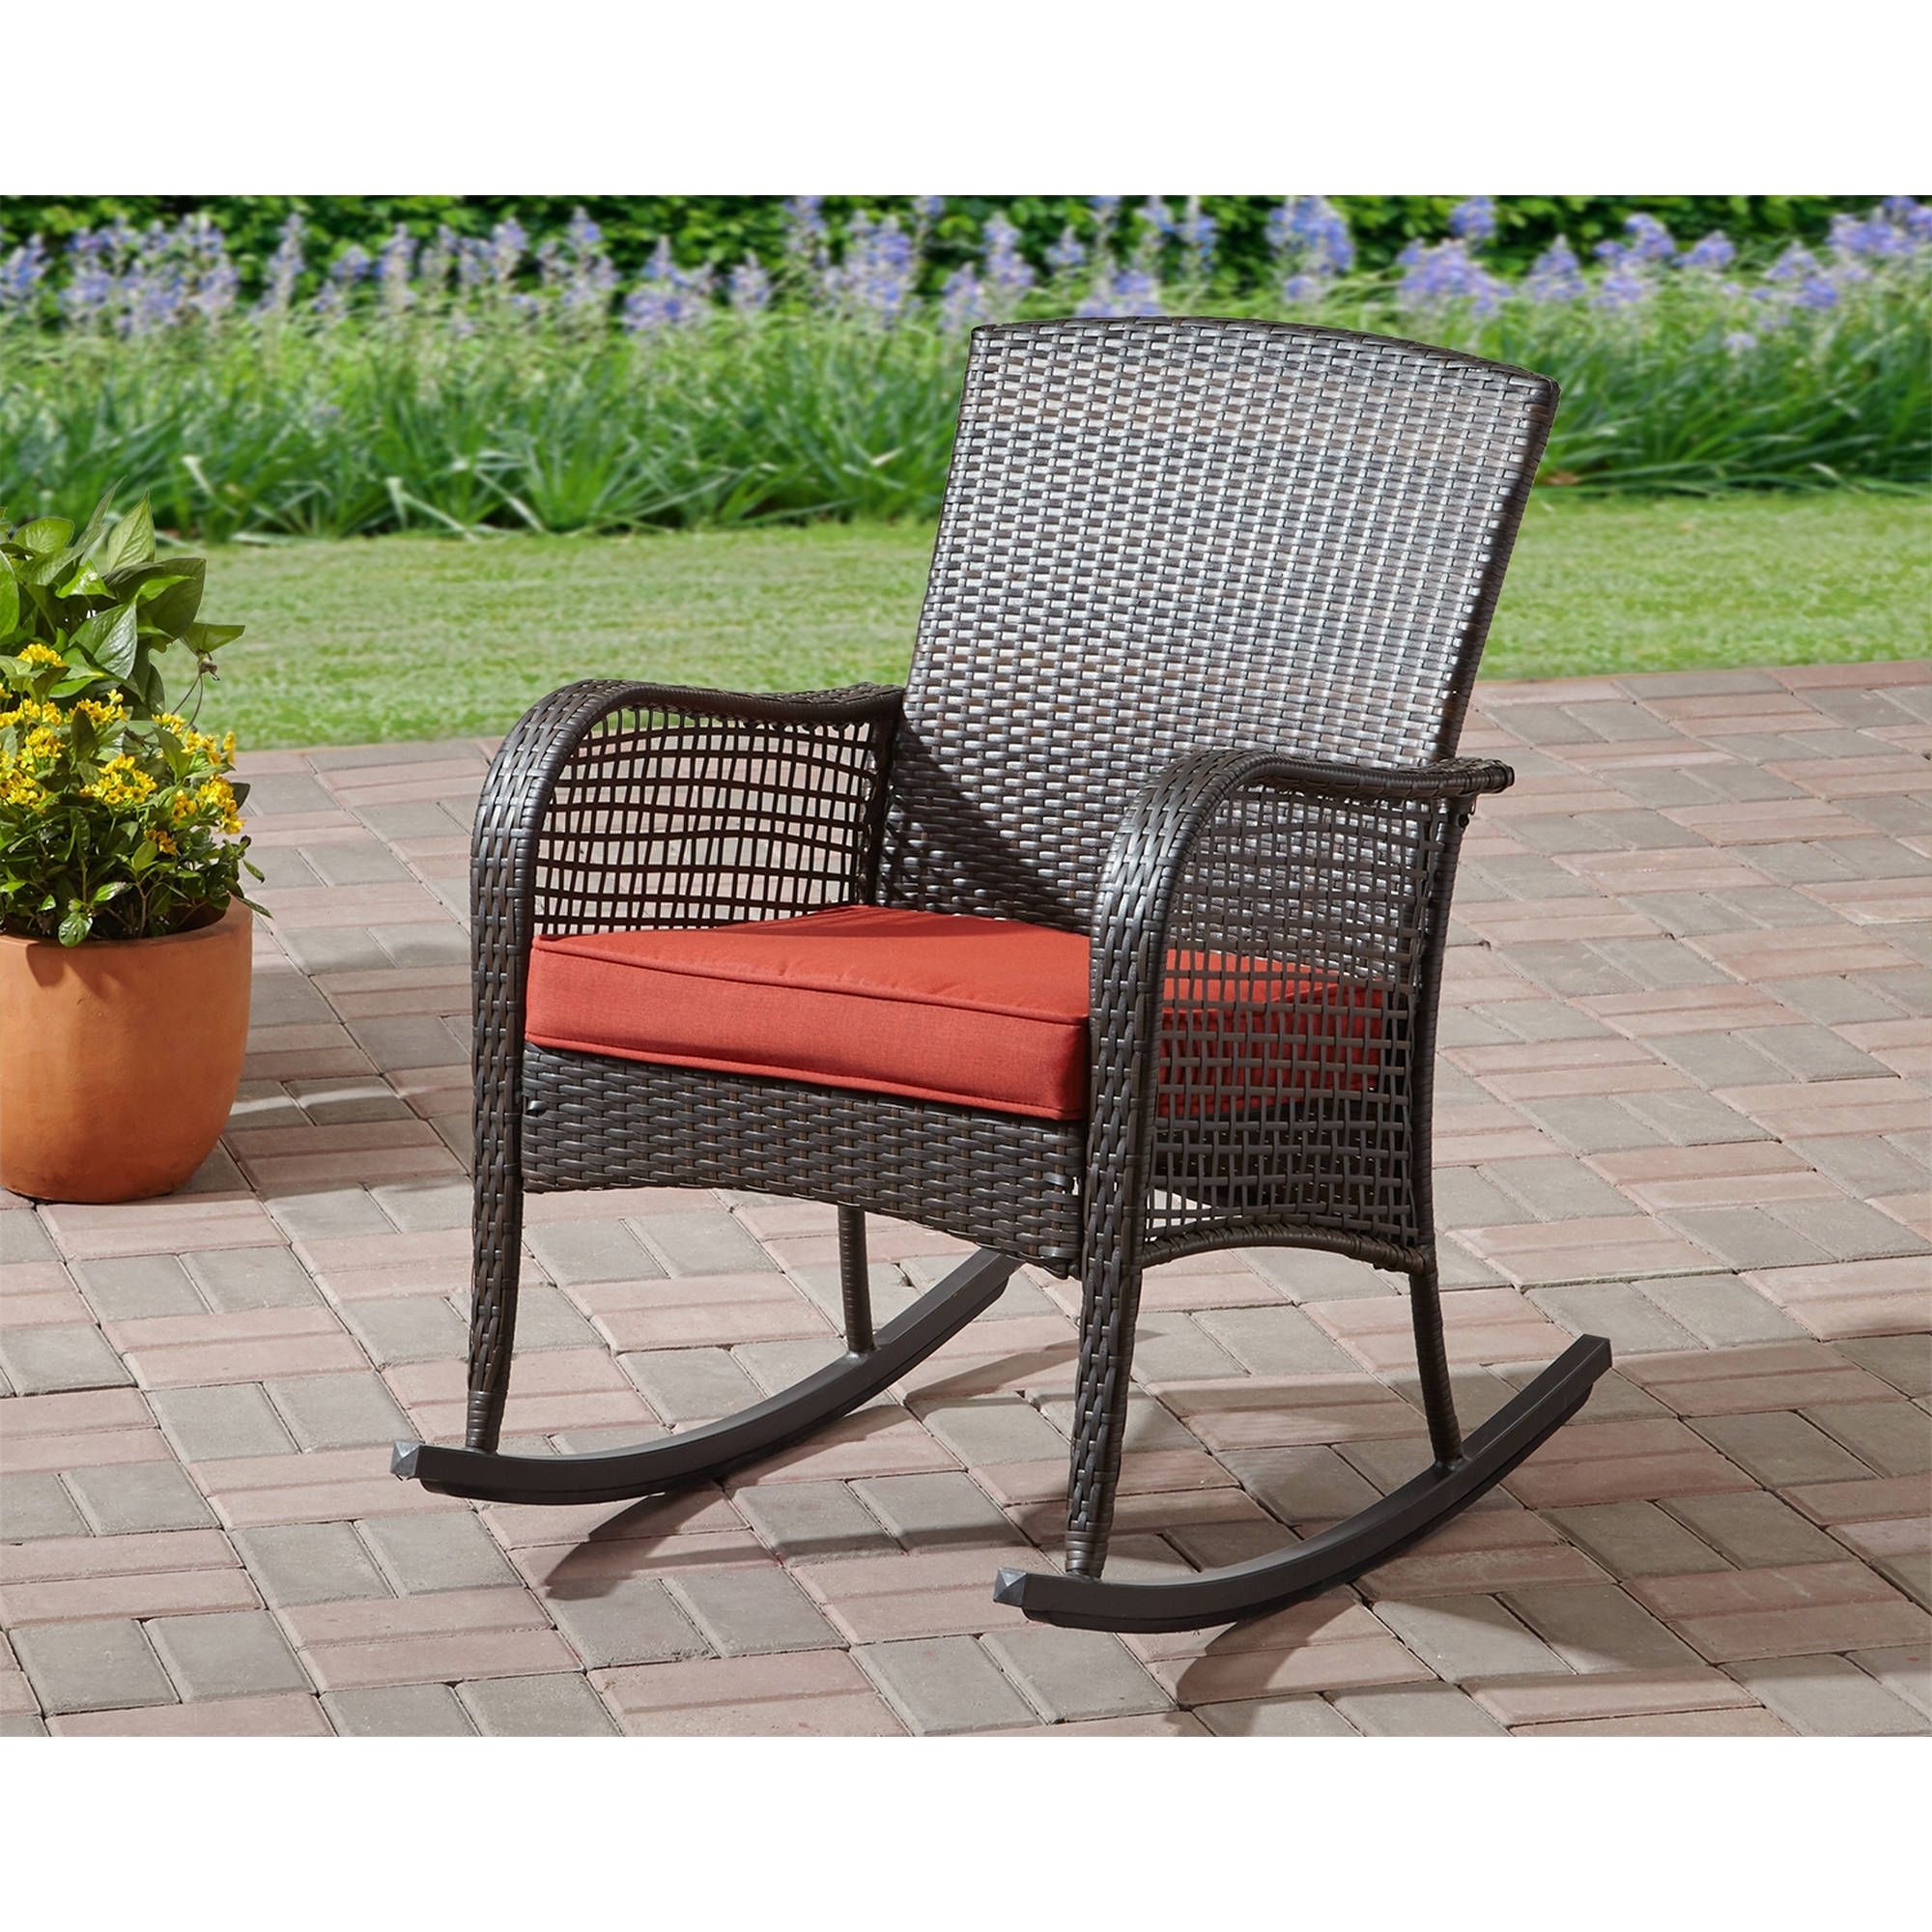 Rocking Chair Cushion Seat Wicker Steel Frame Outdoor Patio Deck For Best And Newest Outdoor Wicker Rocking Chairs With Cushions (Photo 7 of 15)